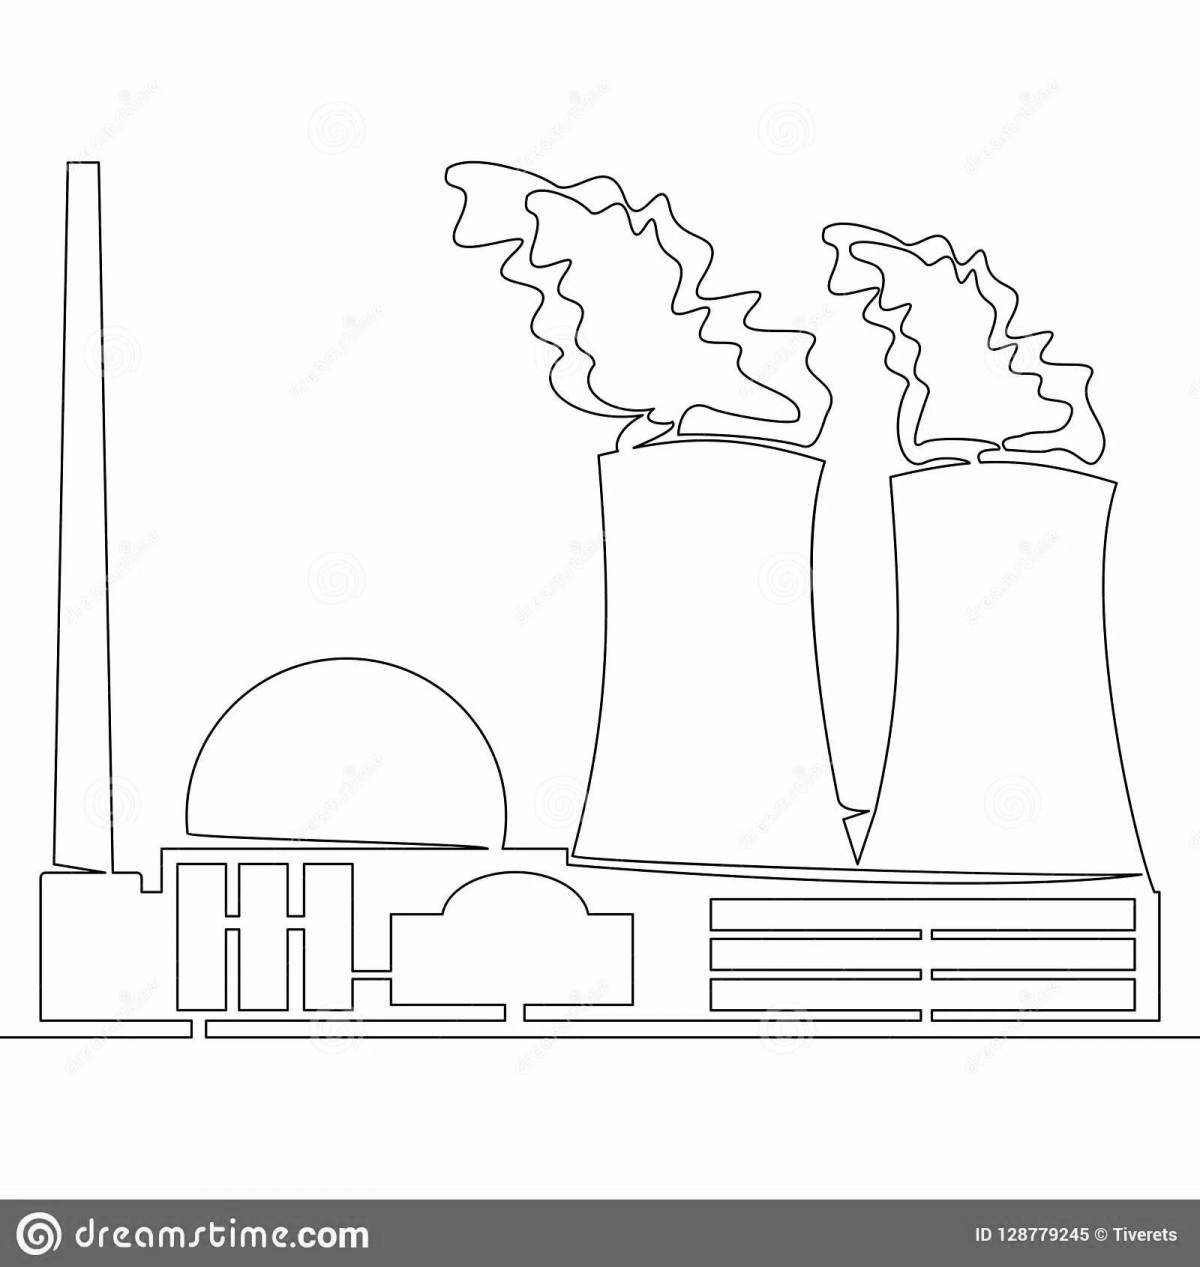 Exciting coloring of the power plant